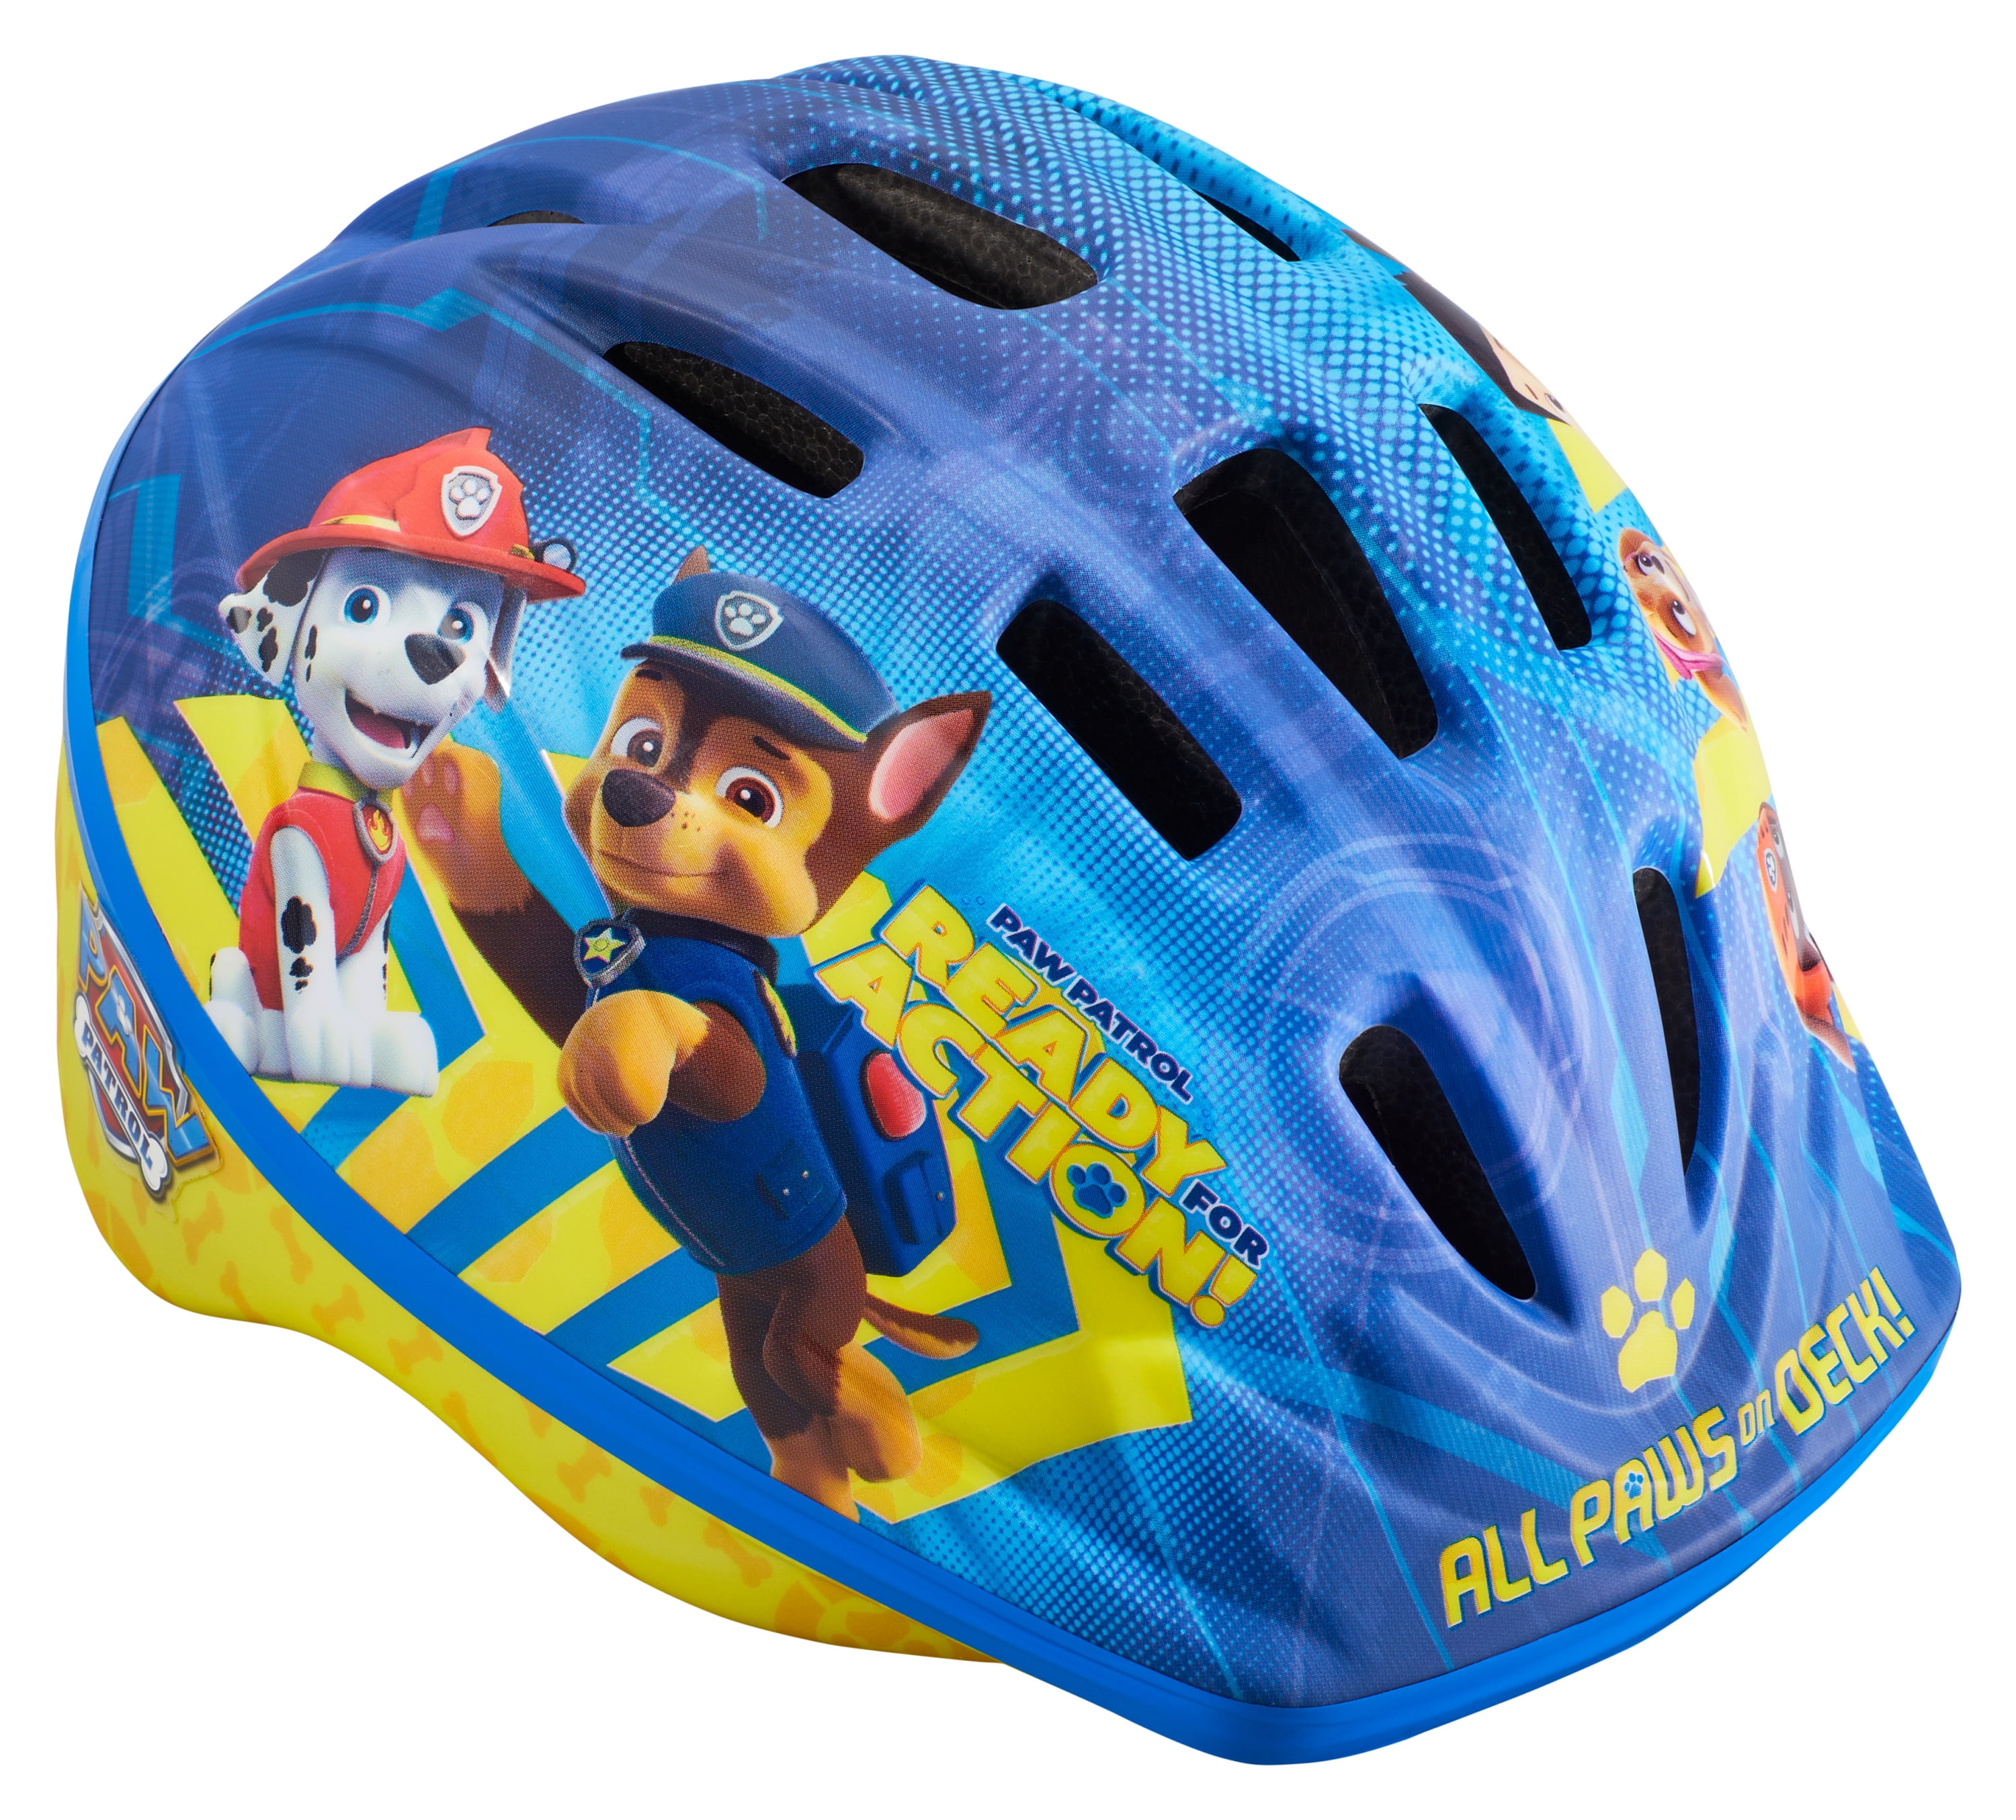 Nickelodeon Paw Patrol: Bike Helmet for Toddlers, Ages 3-5, Blue & Yellow